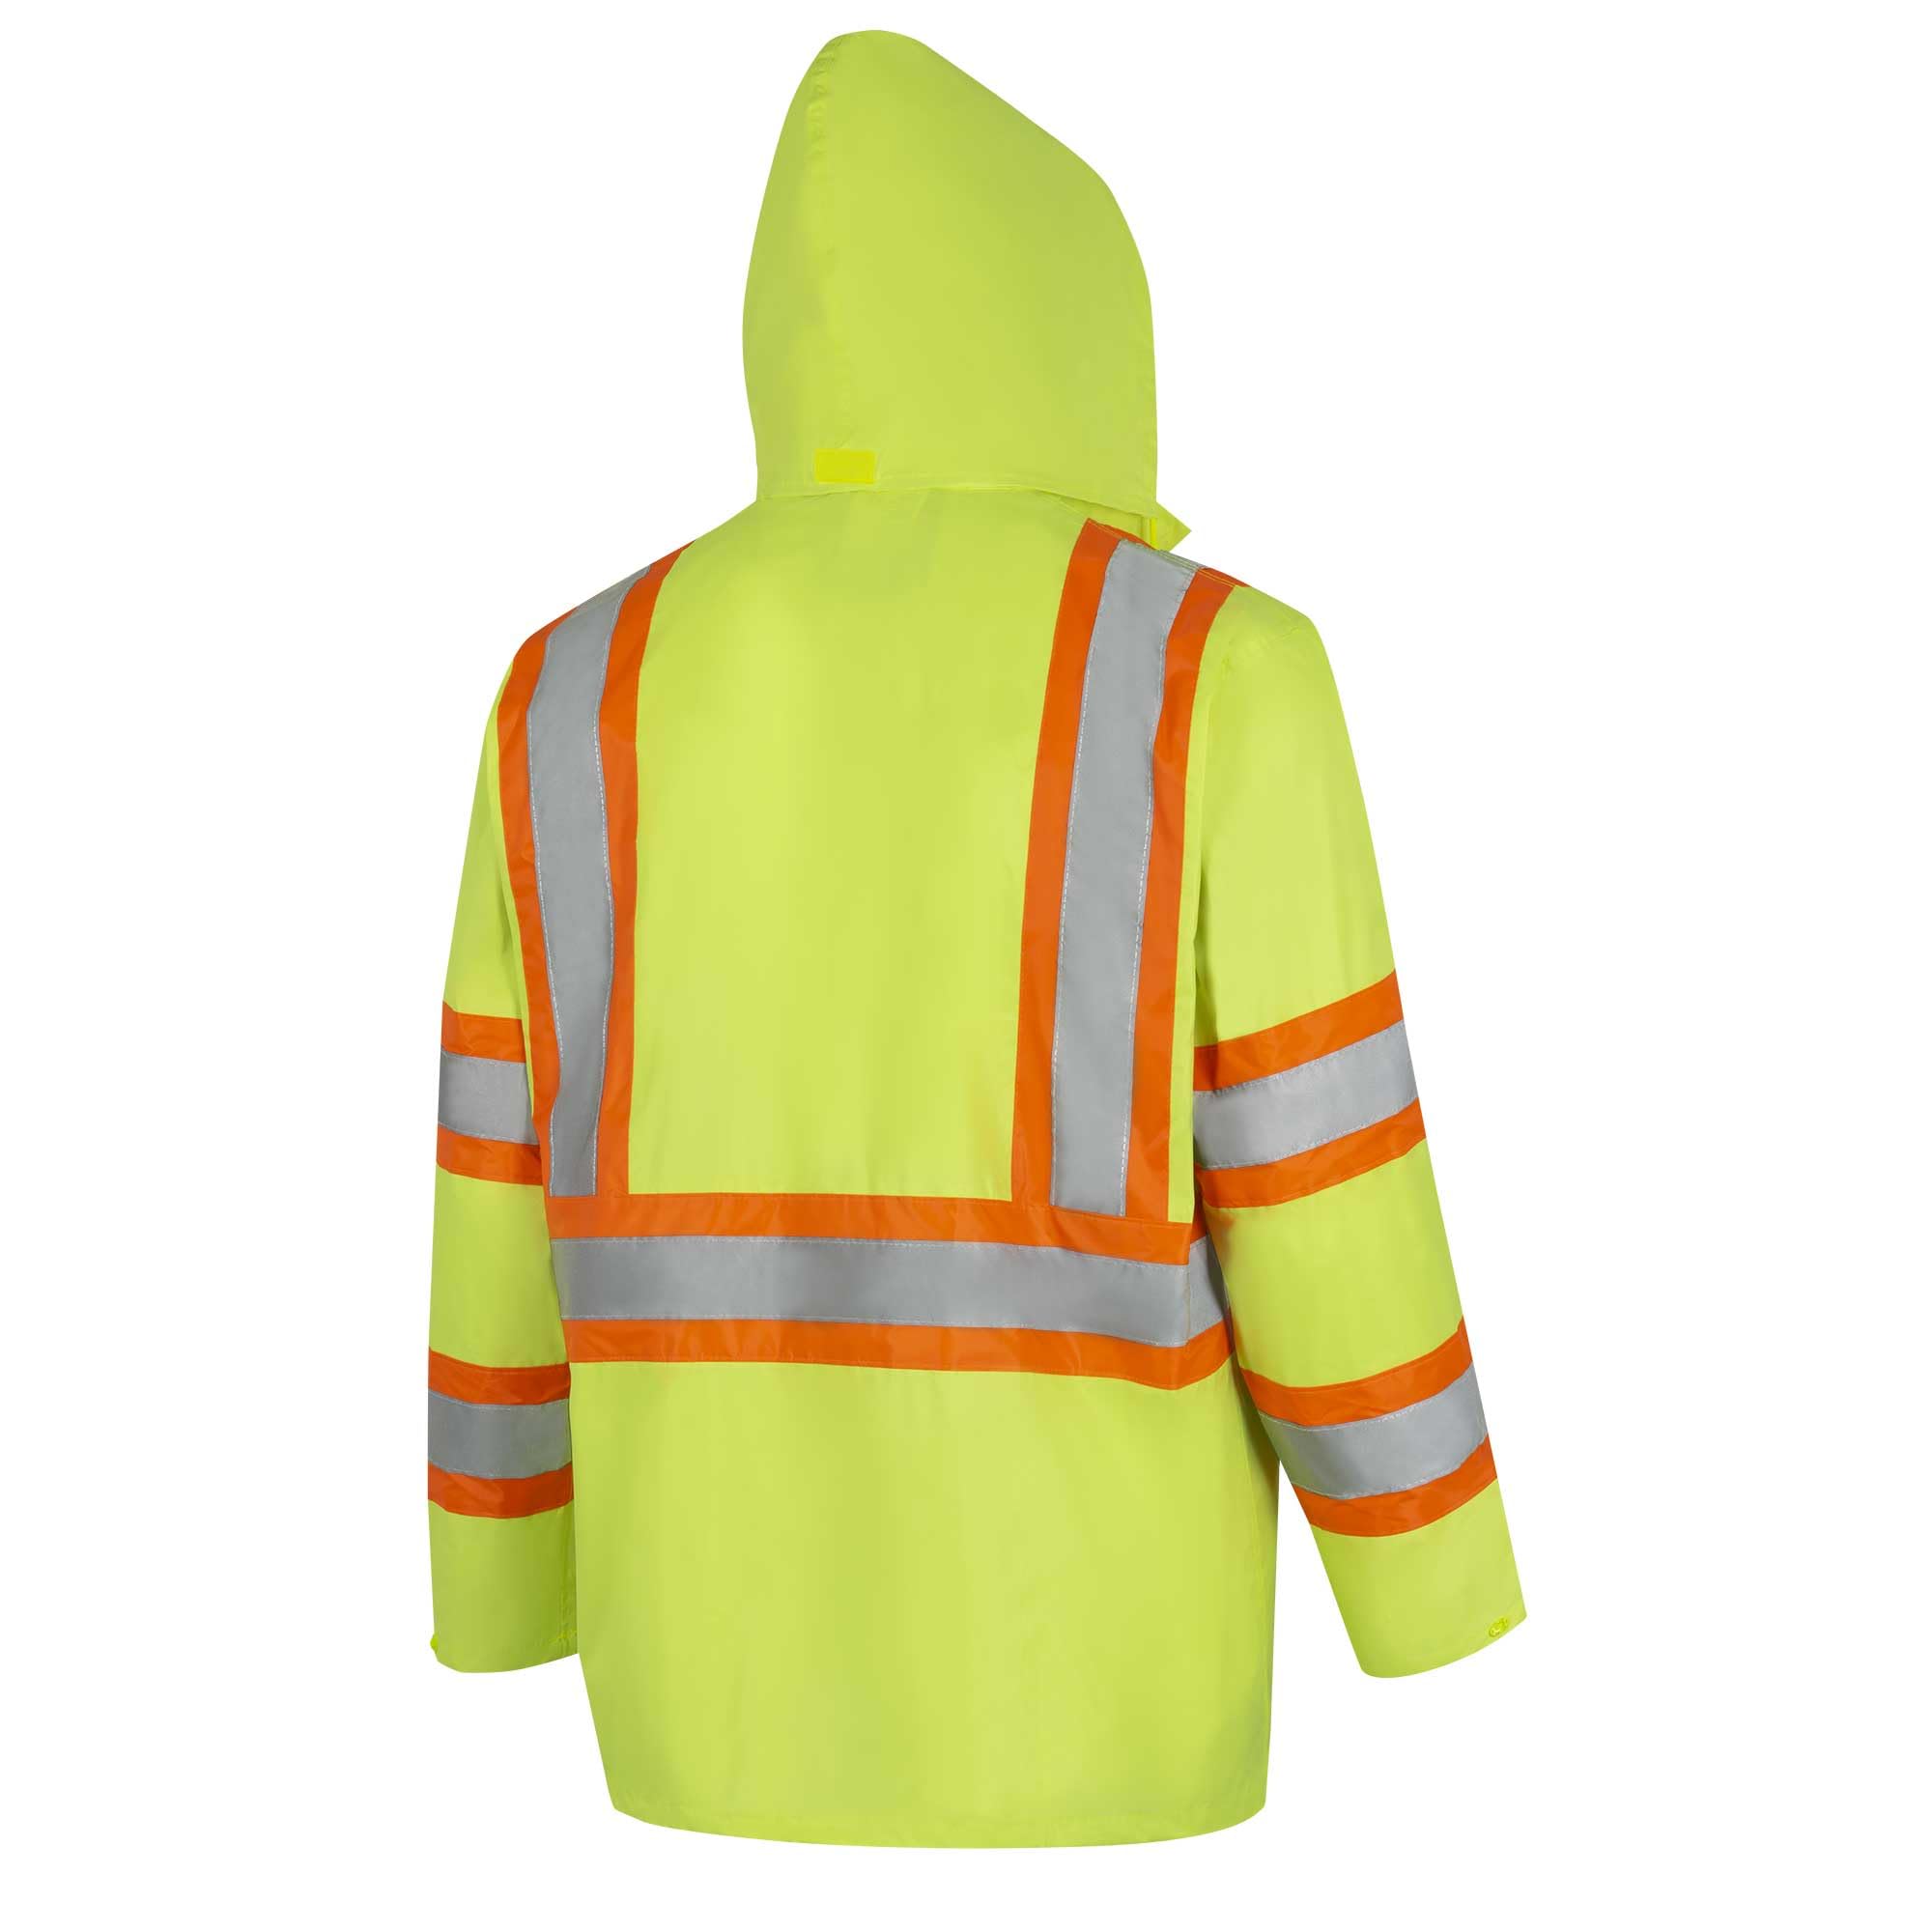 Pioneer High Visibility, Lightweight, Waterproof Safety Rain Suit, Reflective Tape, Polyester PVC, Yellow/Green, Unisex, XL, V1080160U-XL